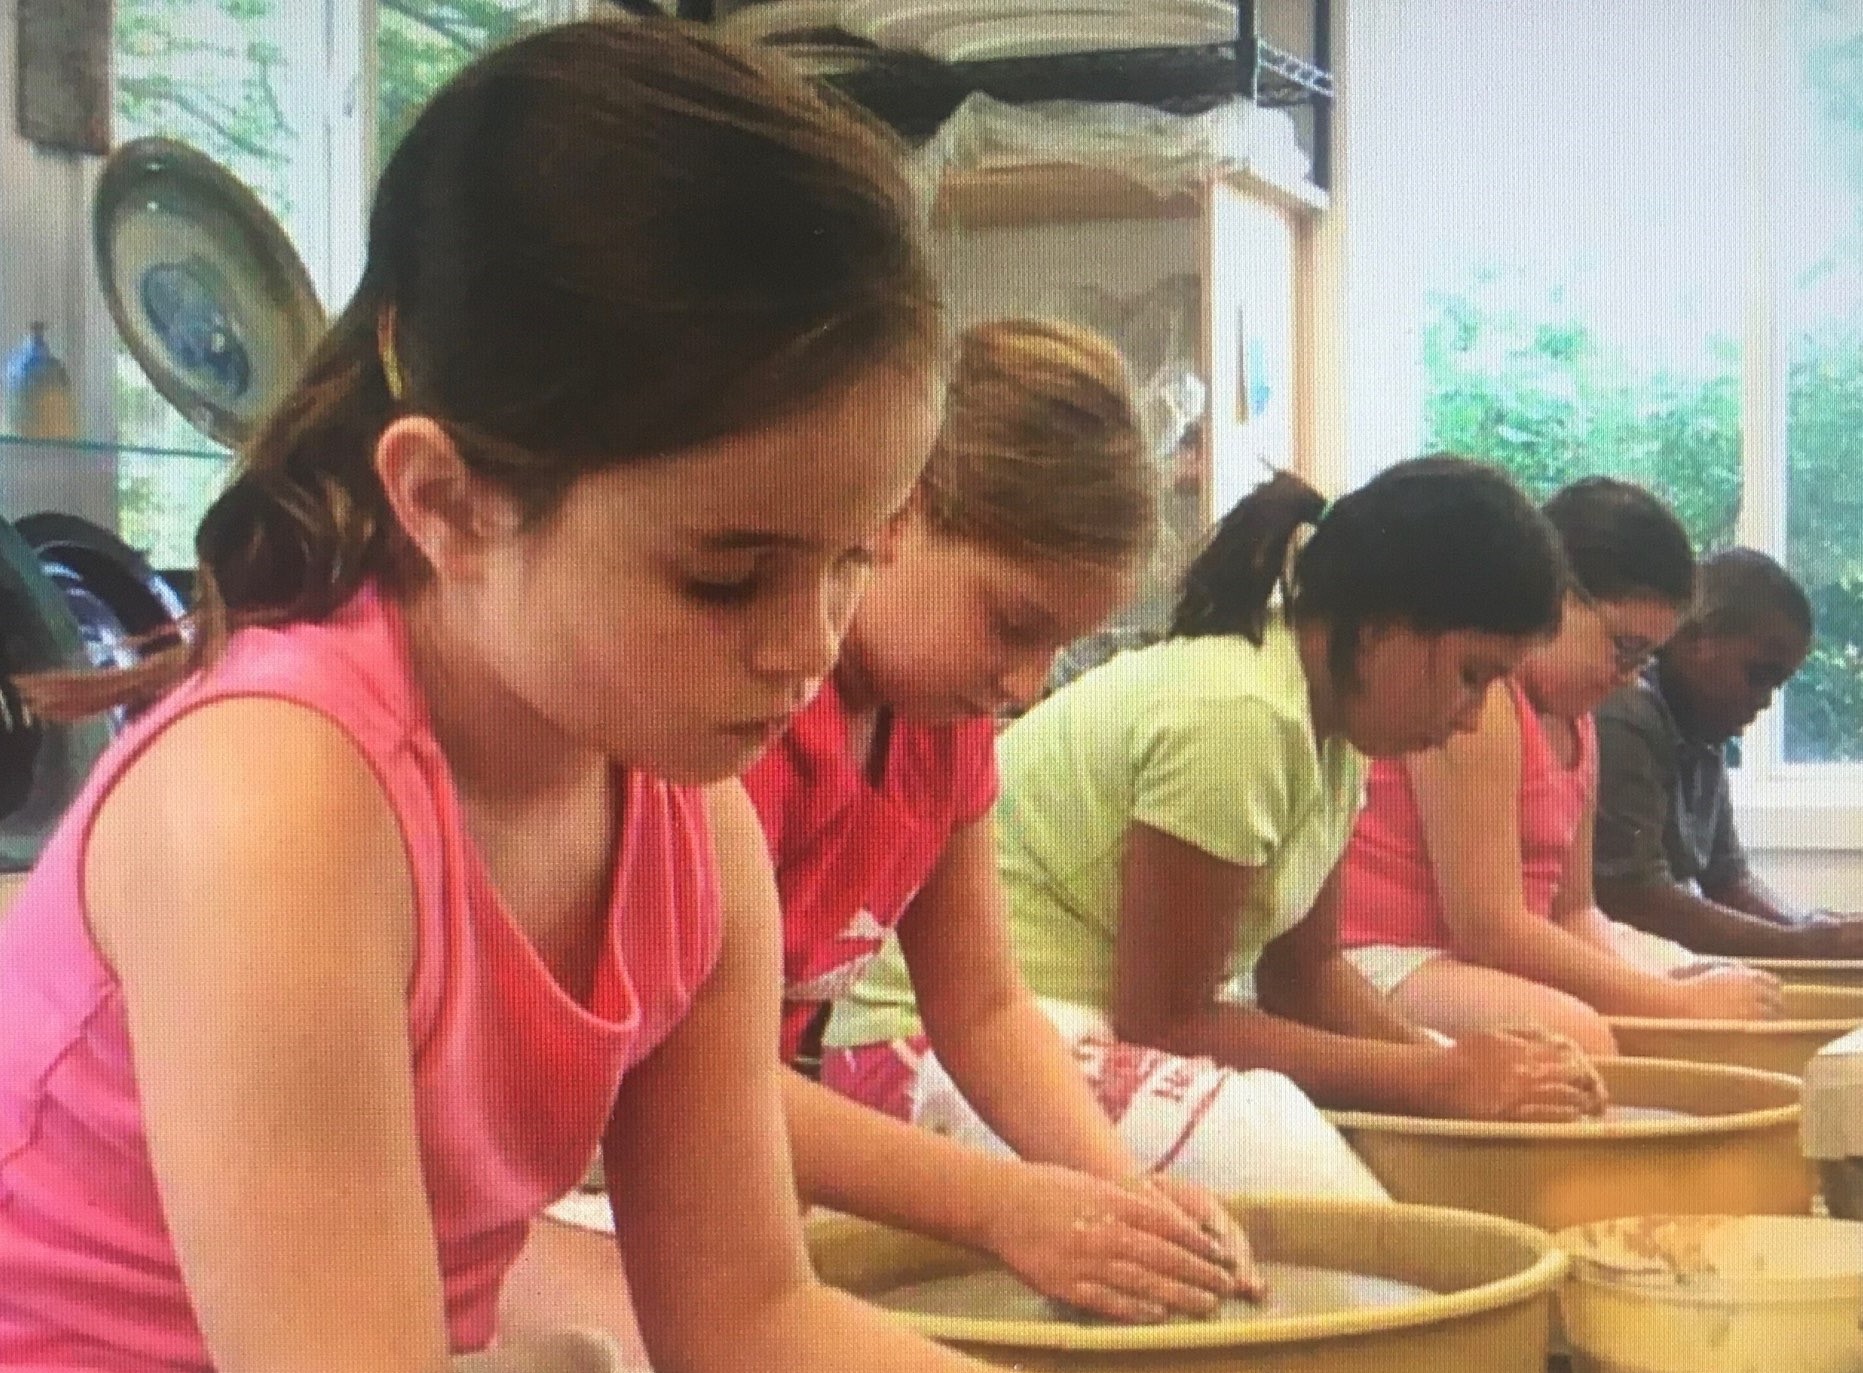 Kids' Class: The Coffee Potter – Ages 10-13 (July 12 and 19)